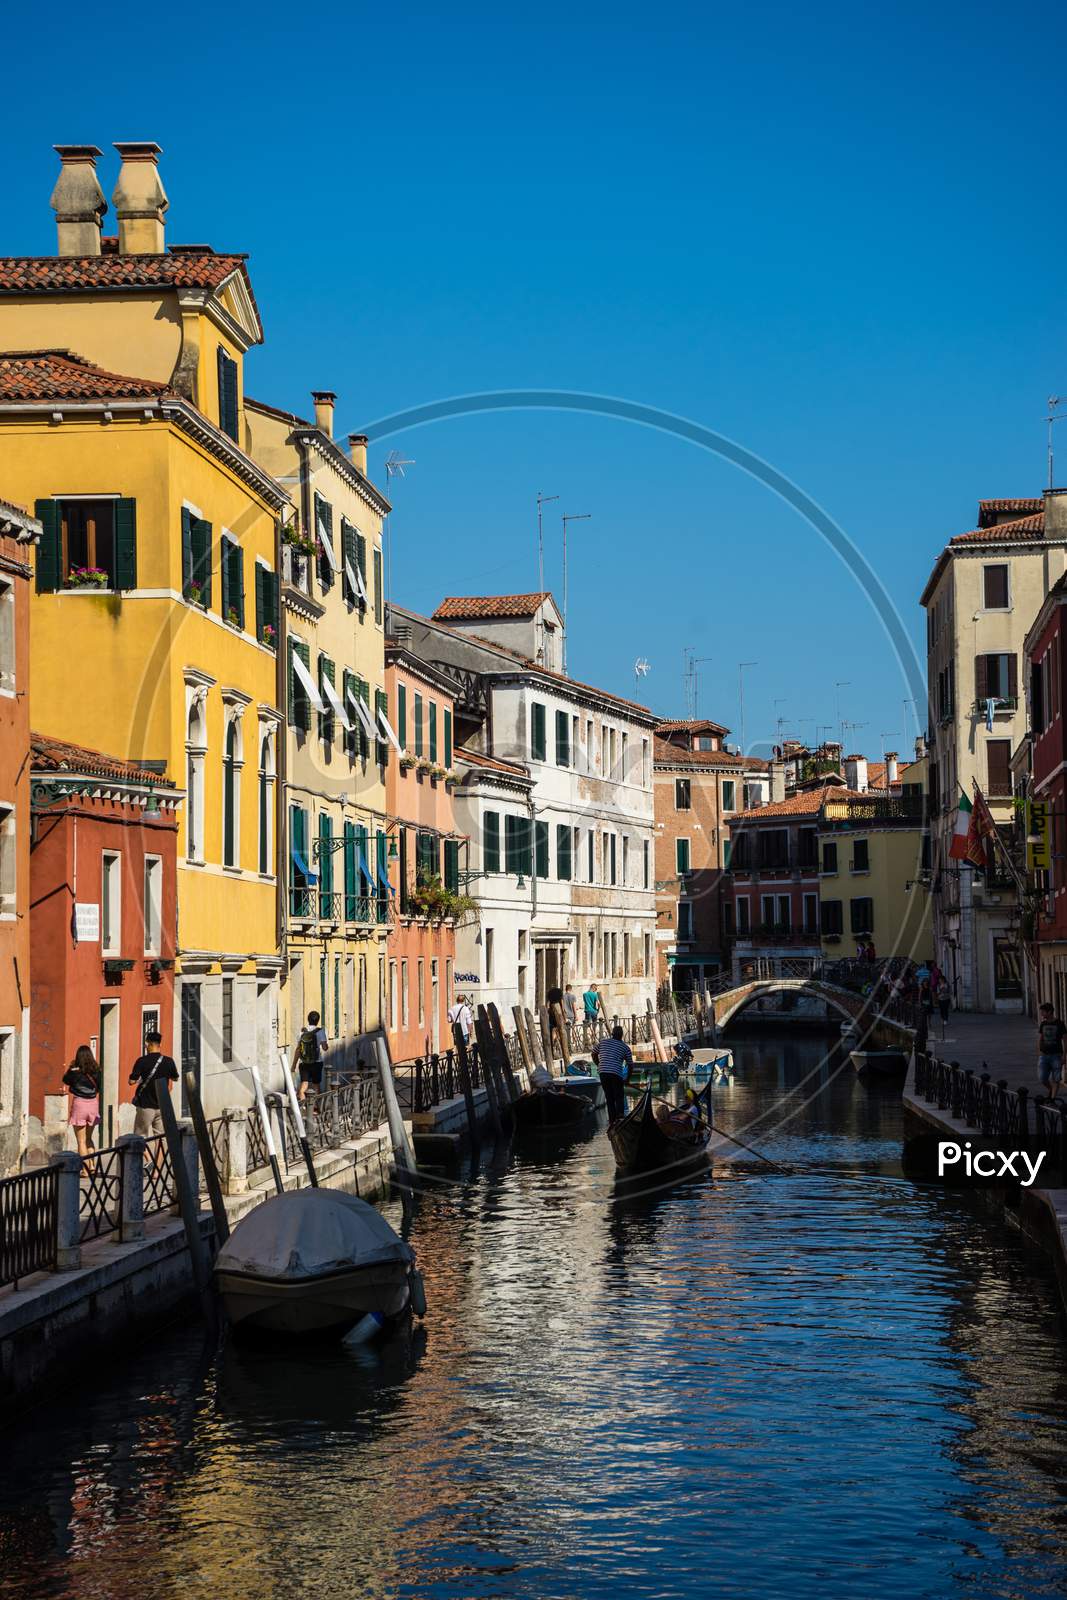 Venice, Italy - 30 June 2018: People Walking Down The Narrow Streets Of Venice Along A Canal, Italy